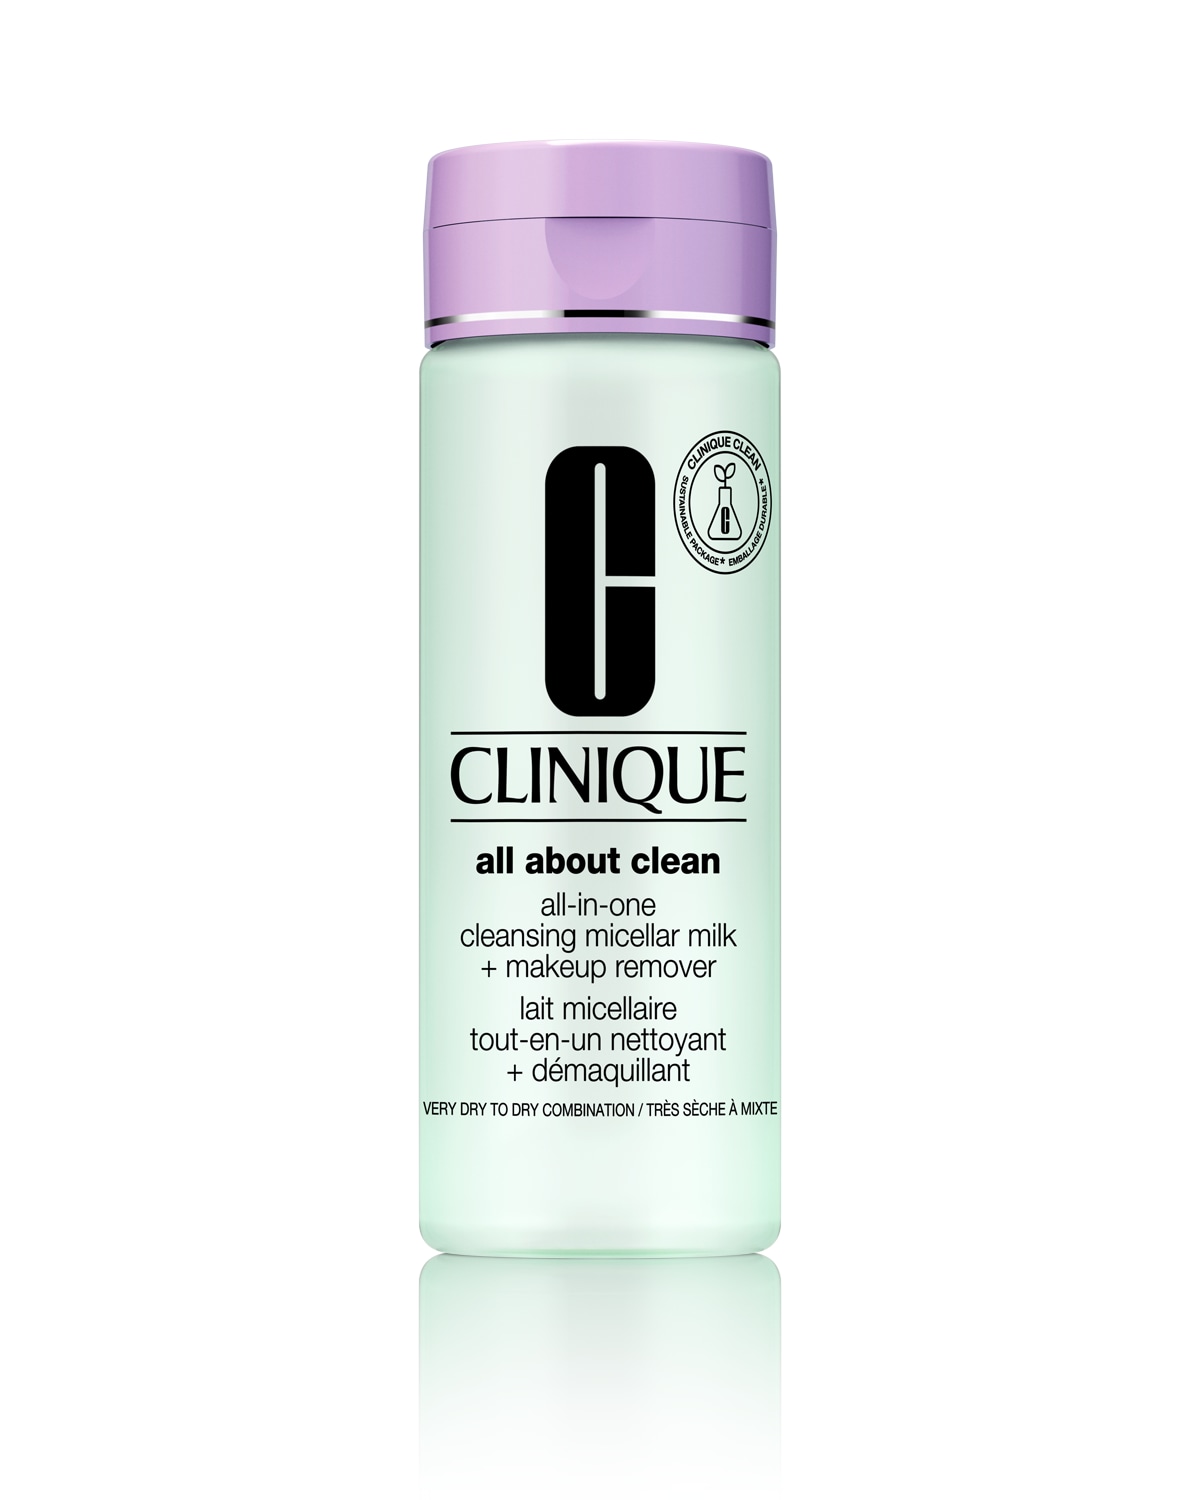 All About Clean All-in-One Micellar Milk + Makeup Remover